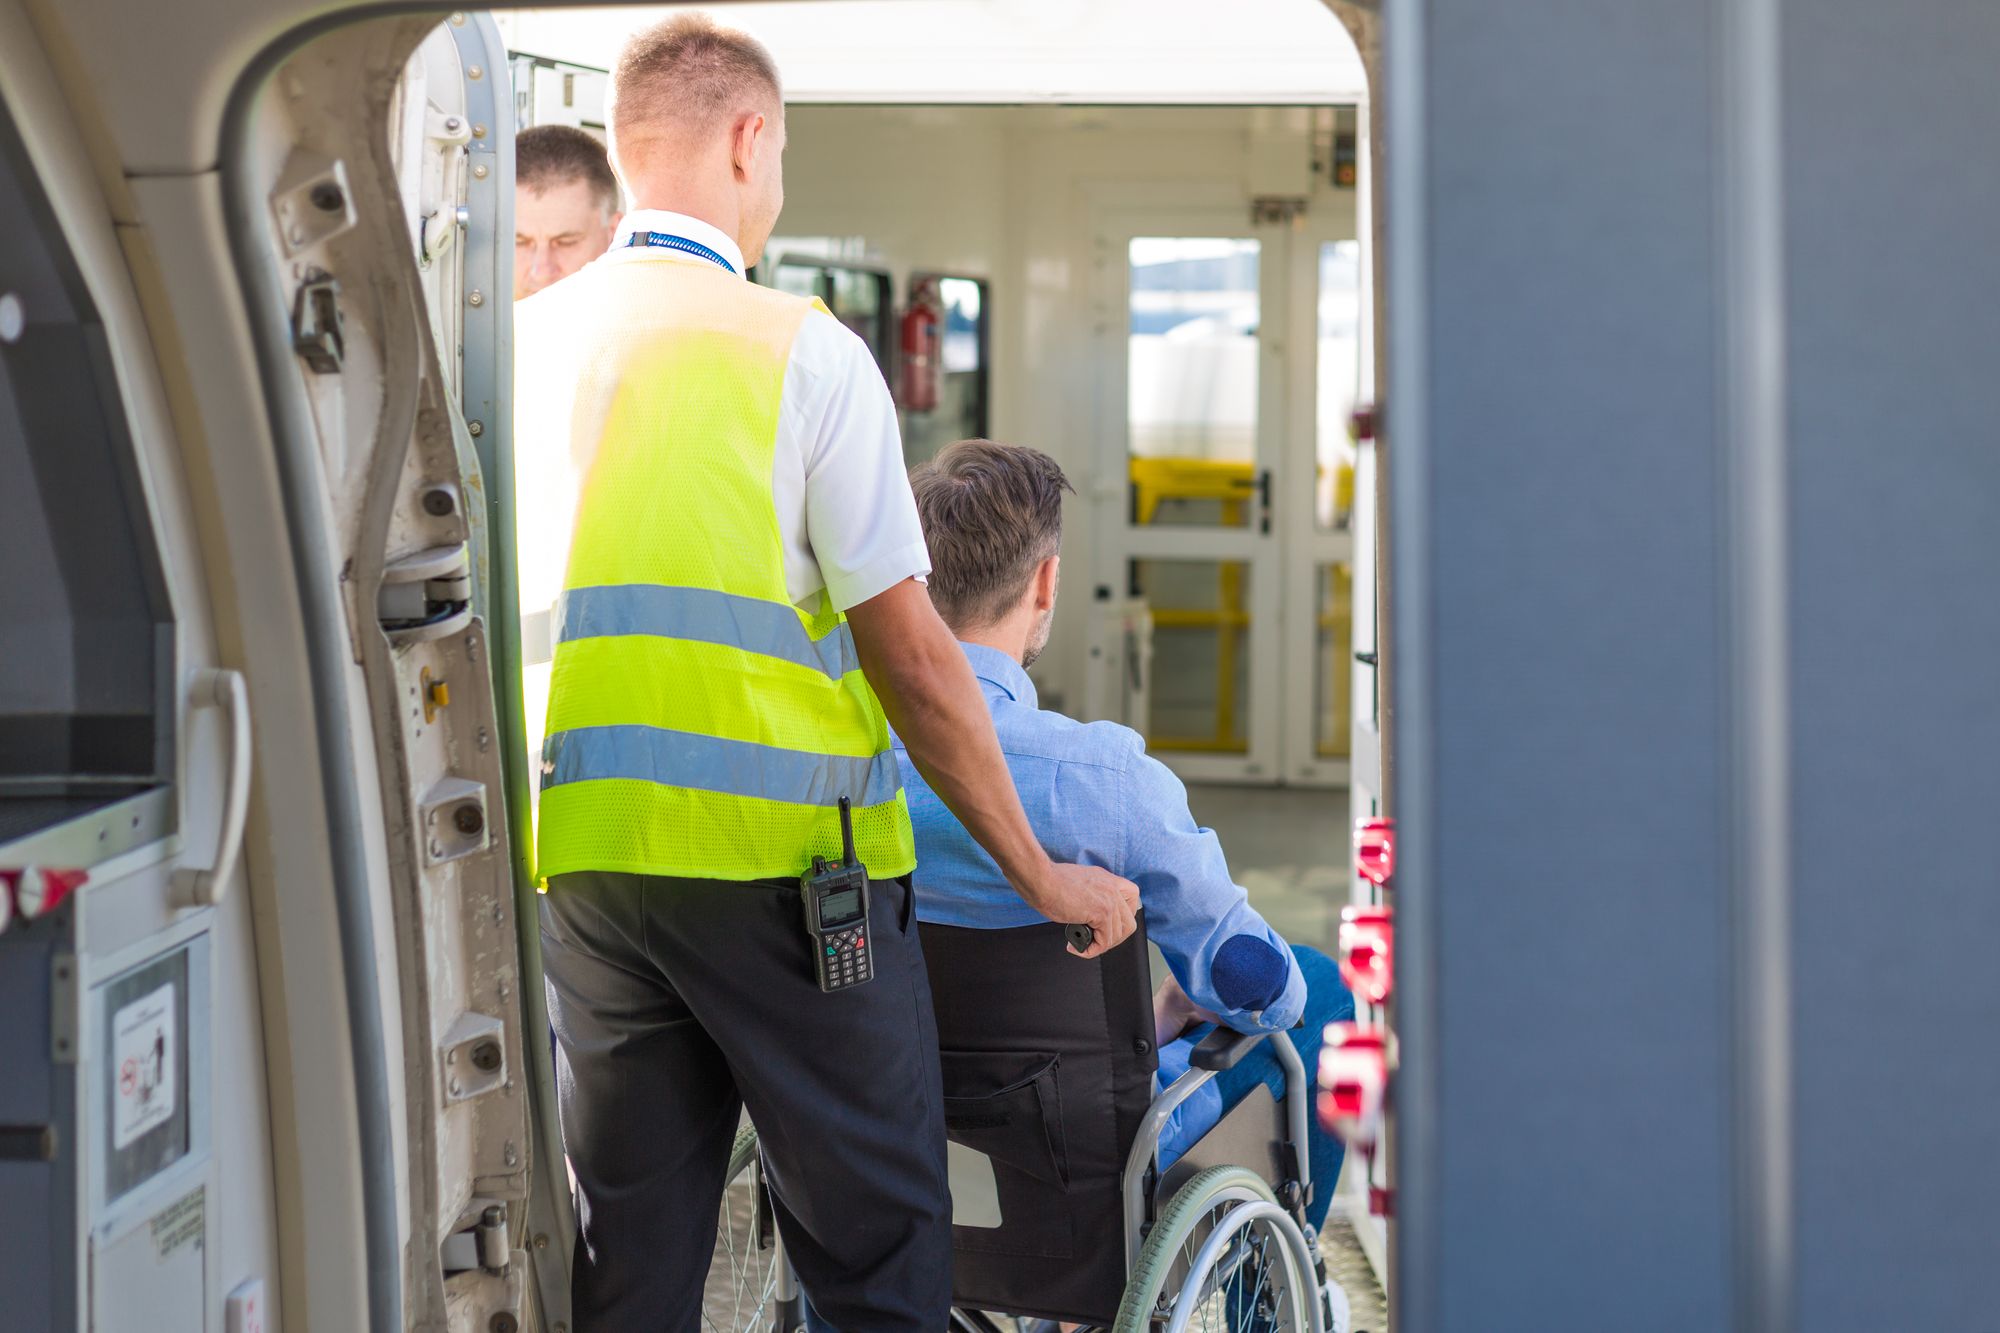 Wheelchair travel practices at the airport include protecting your wheelchair by stowing it in-cabin.